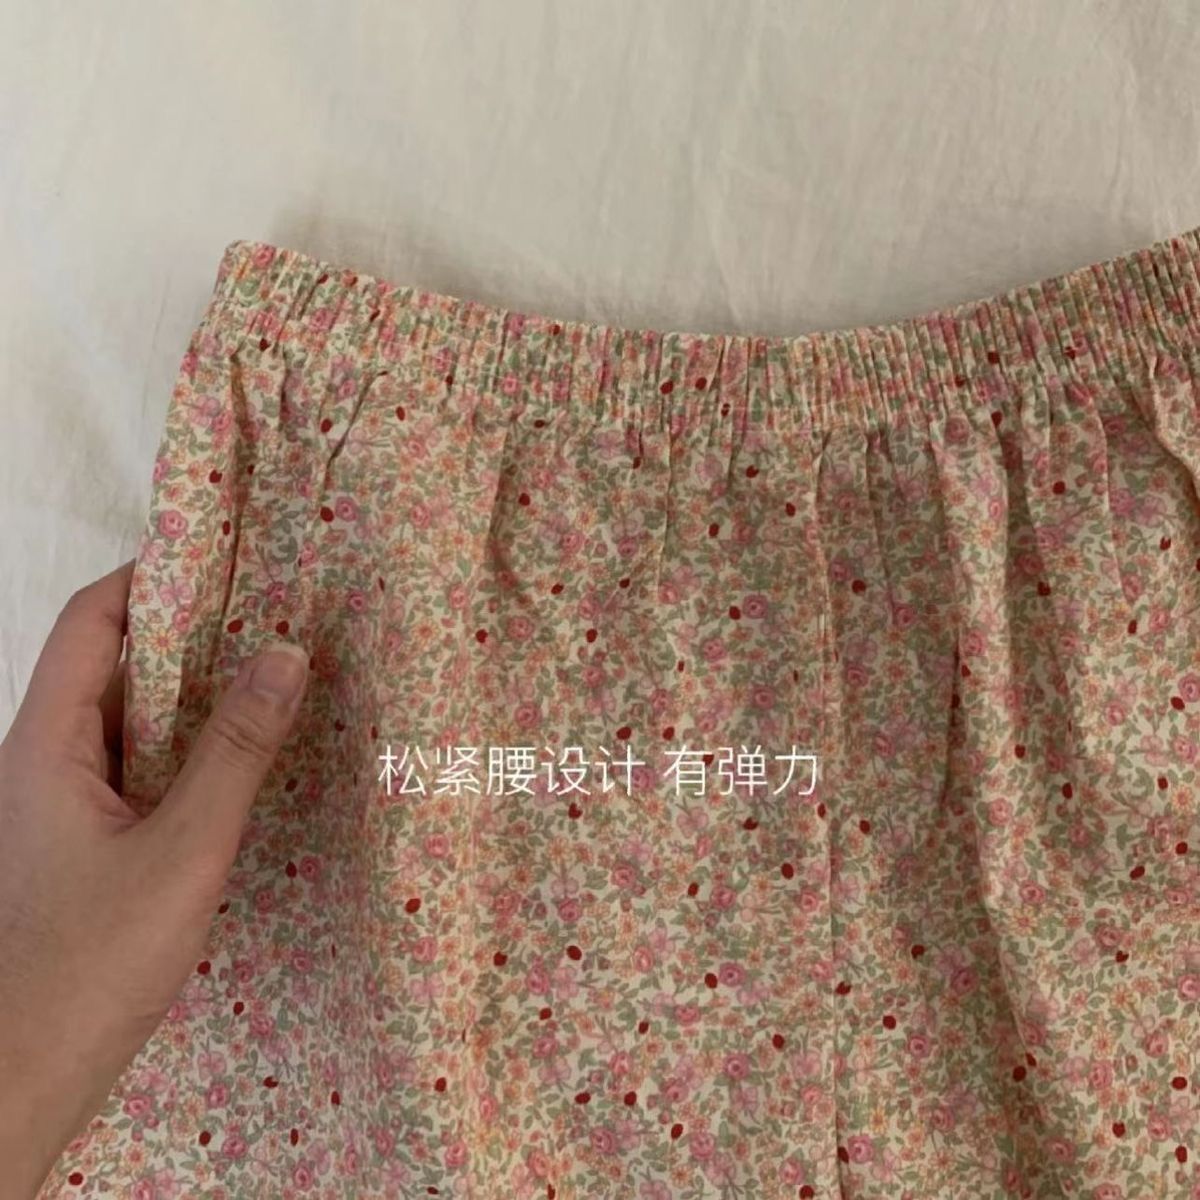 Loose Floral Pajama Pants Elastic Waist Girls High Value Vest With Chest Pad Niche Breathable Student Home Pants Summer Suit